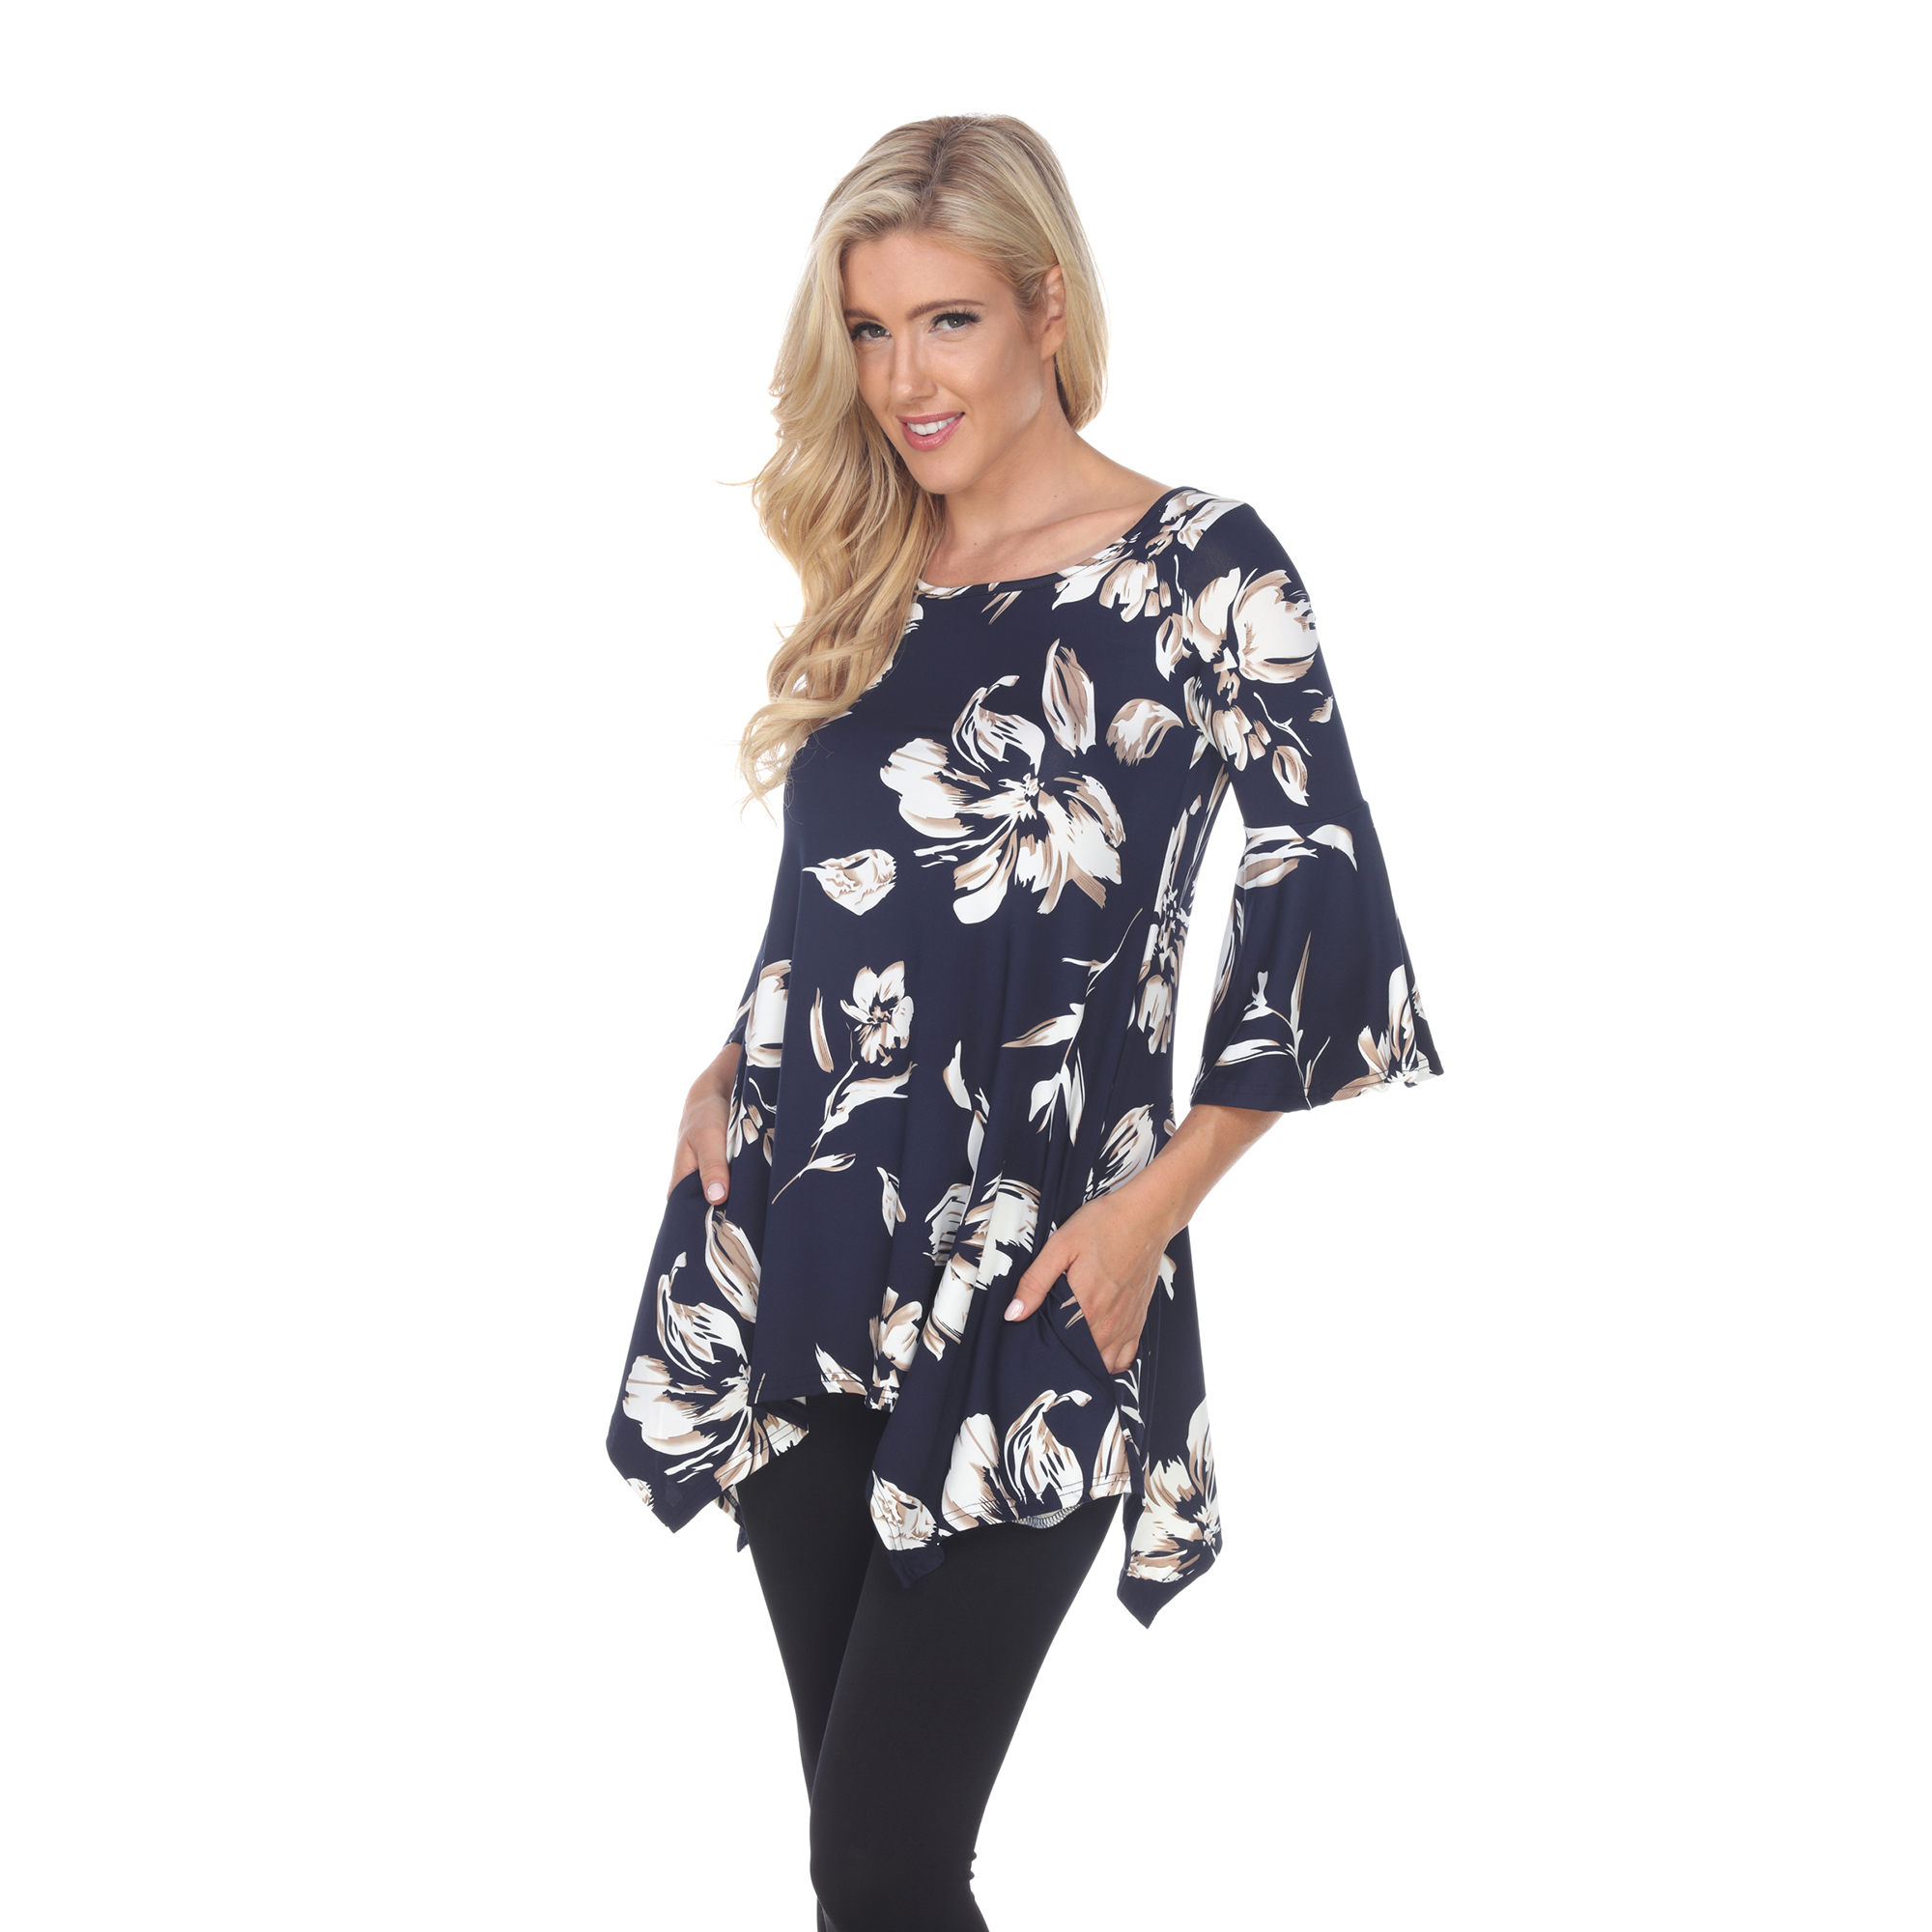 White Mark Women's Floral Print Quarter Sleeve Tunic Top With Pockets - Navy, X-Large